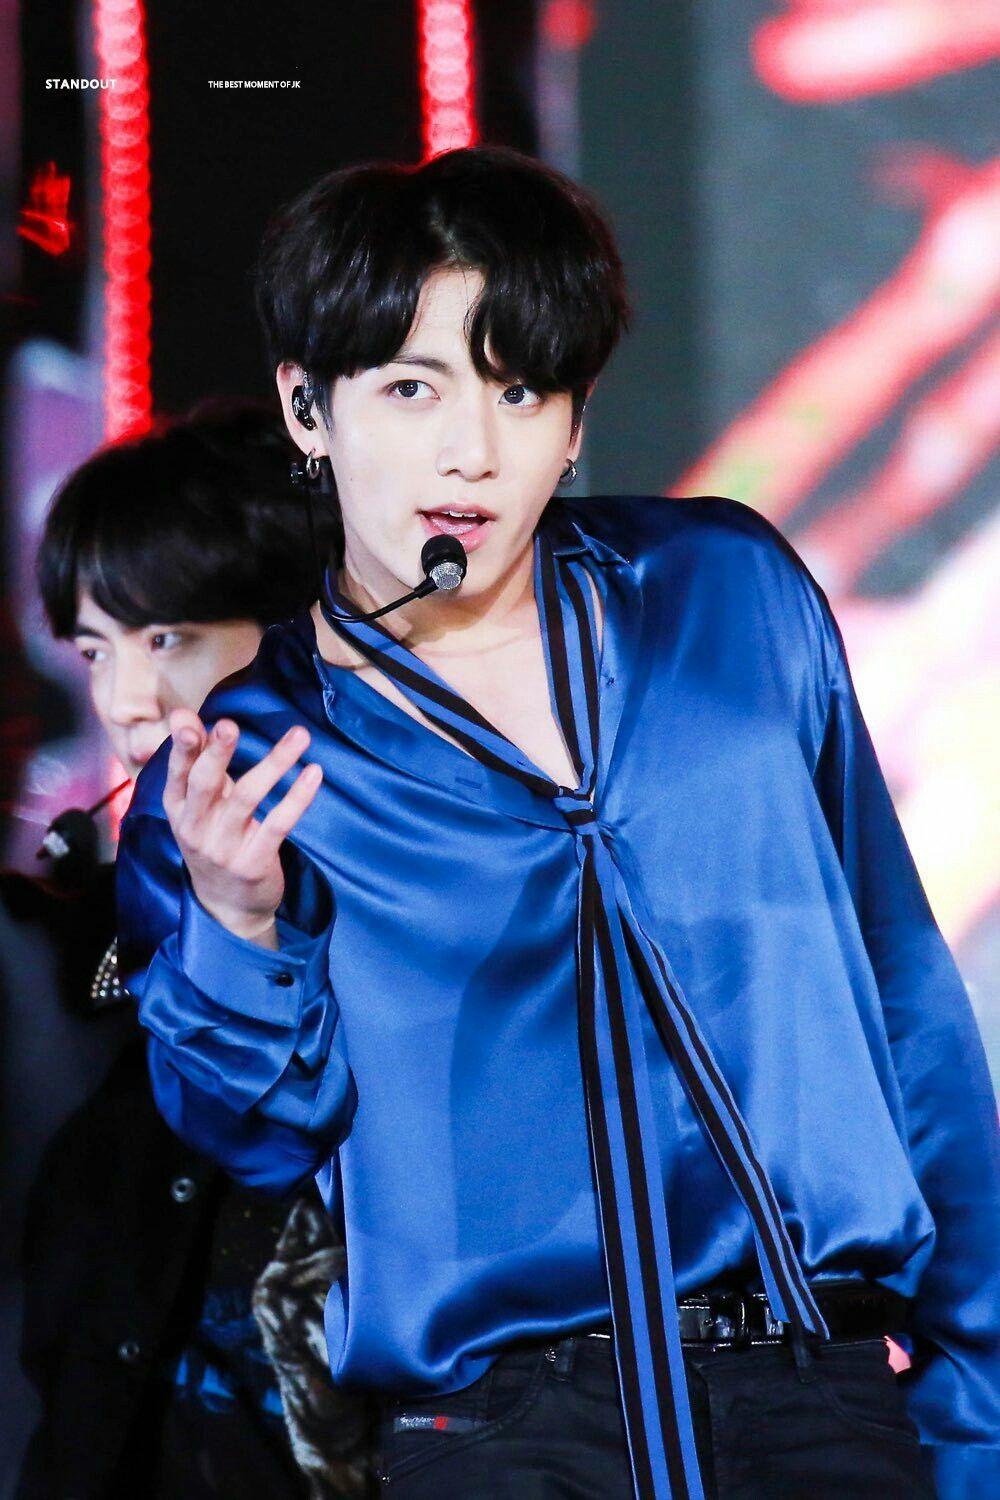 Cute BTS JungKook Wallpaper for Android